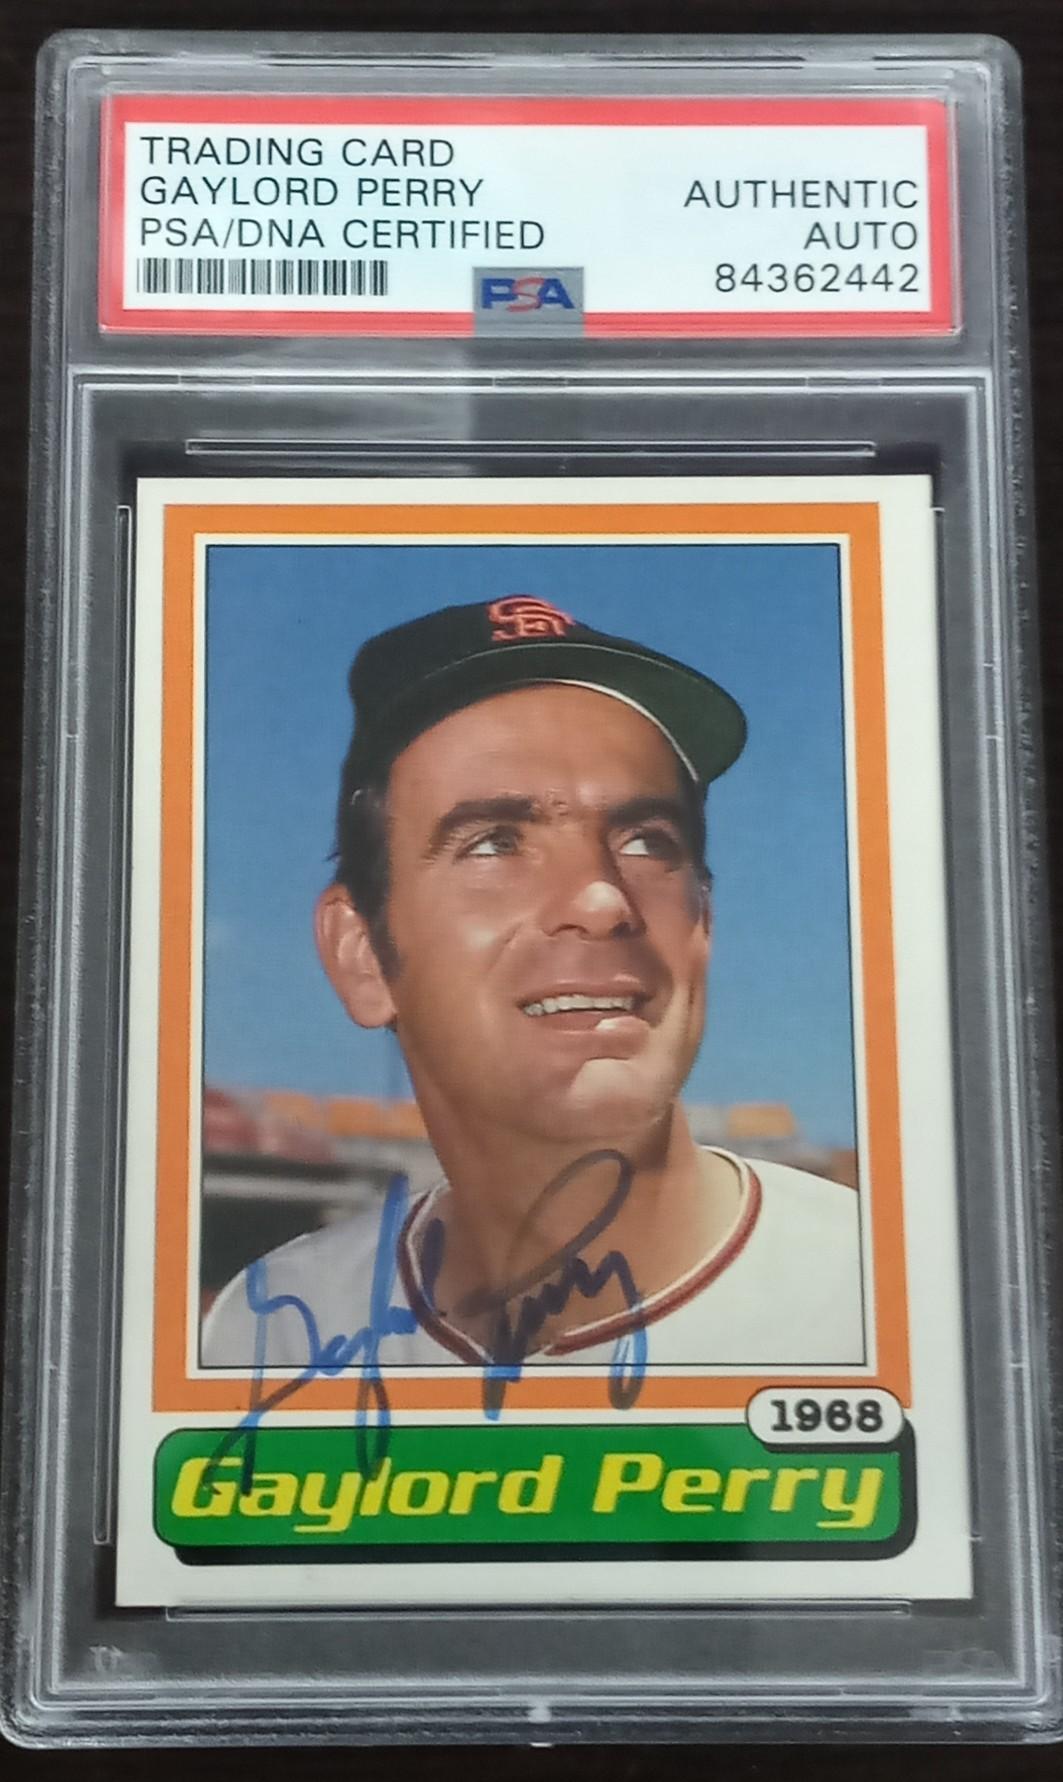 GAYLORD PERRY PSA AUTO CARD